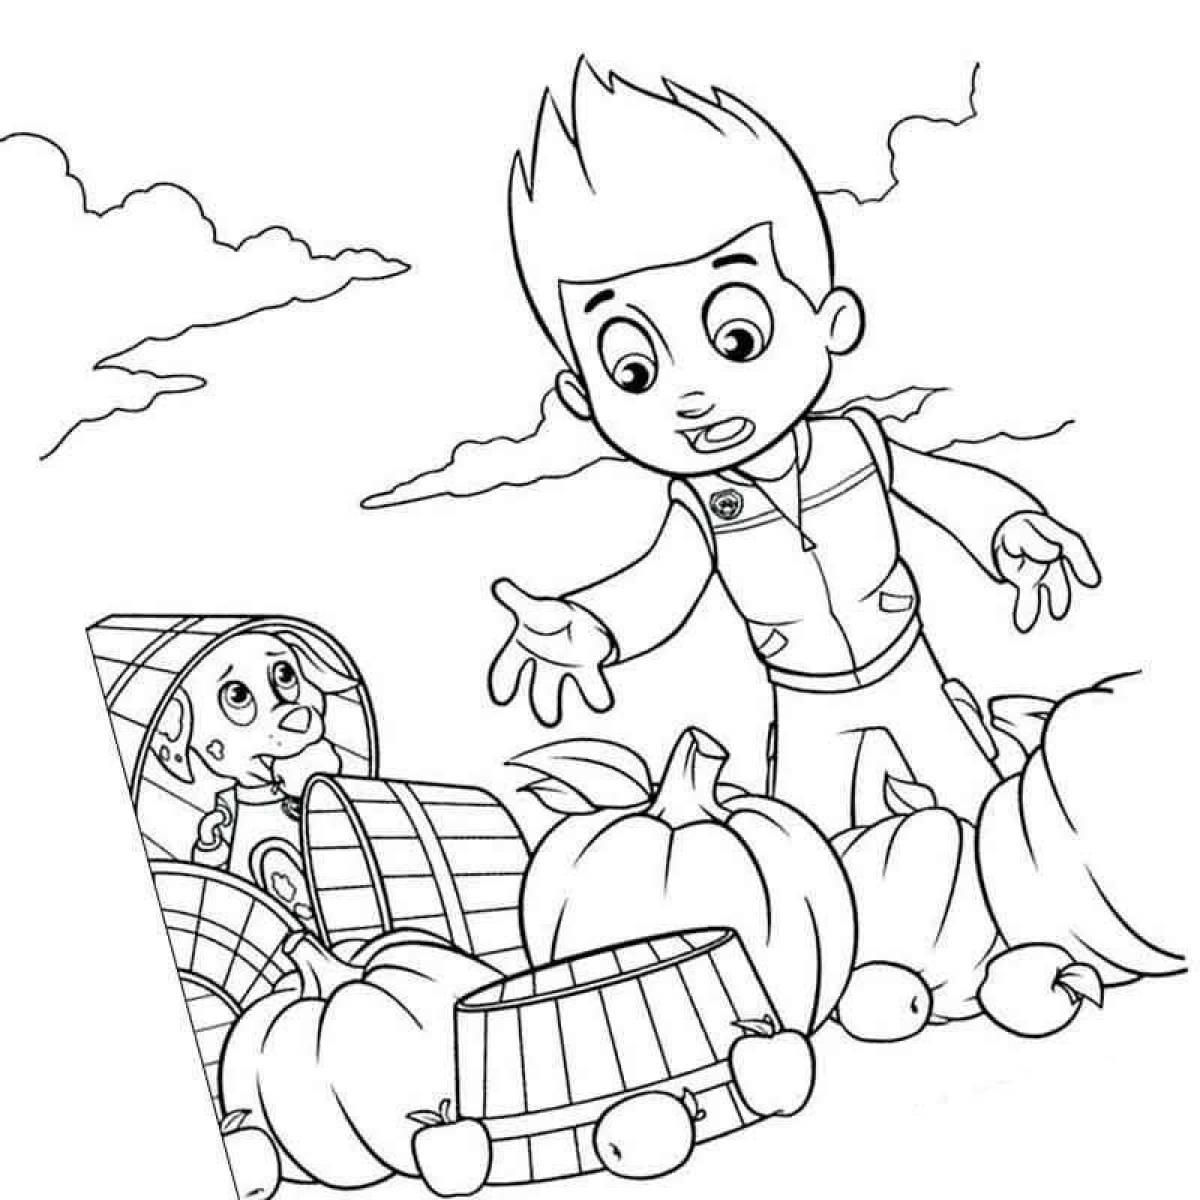 Fearless Rider coloring page